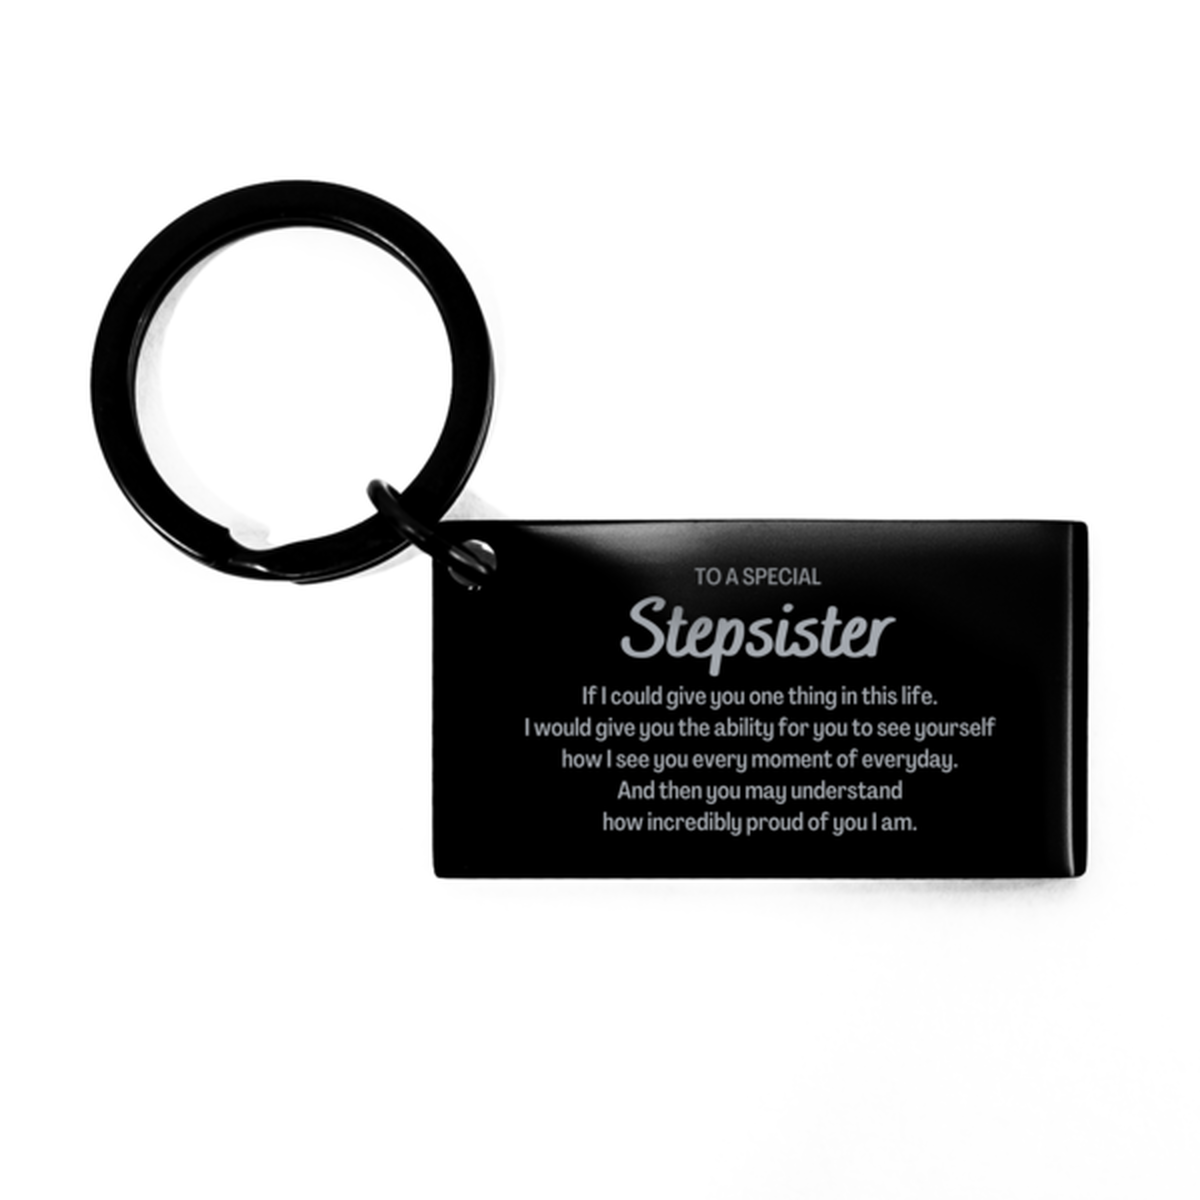 To My Stepsister Keychain, Gifts For Stepsister Engraved, Inspirational Gifts for Christmas Birthday, Epic Gifts for Stepsister To A Special Stepsister how incredibly proud of you I am